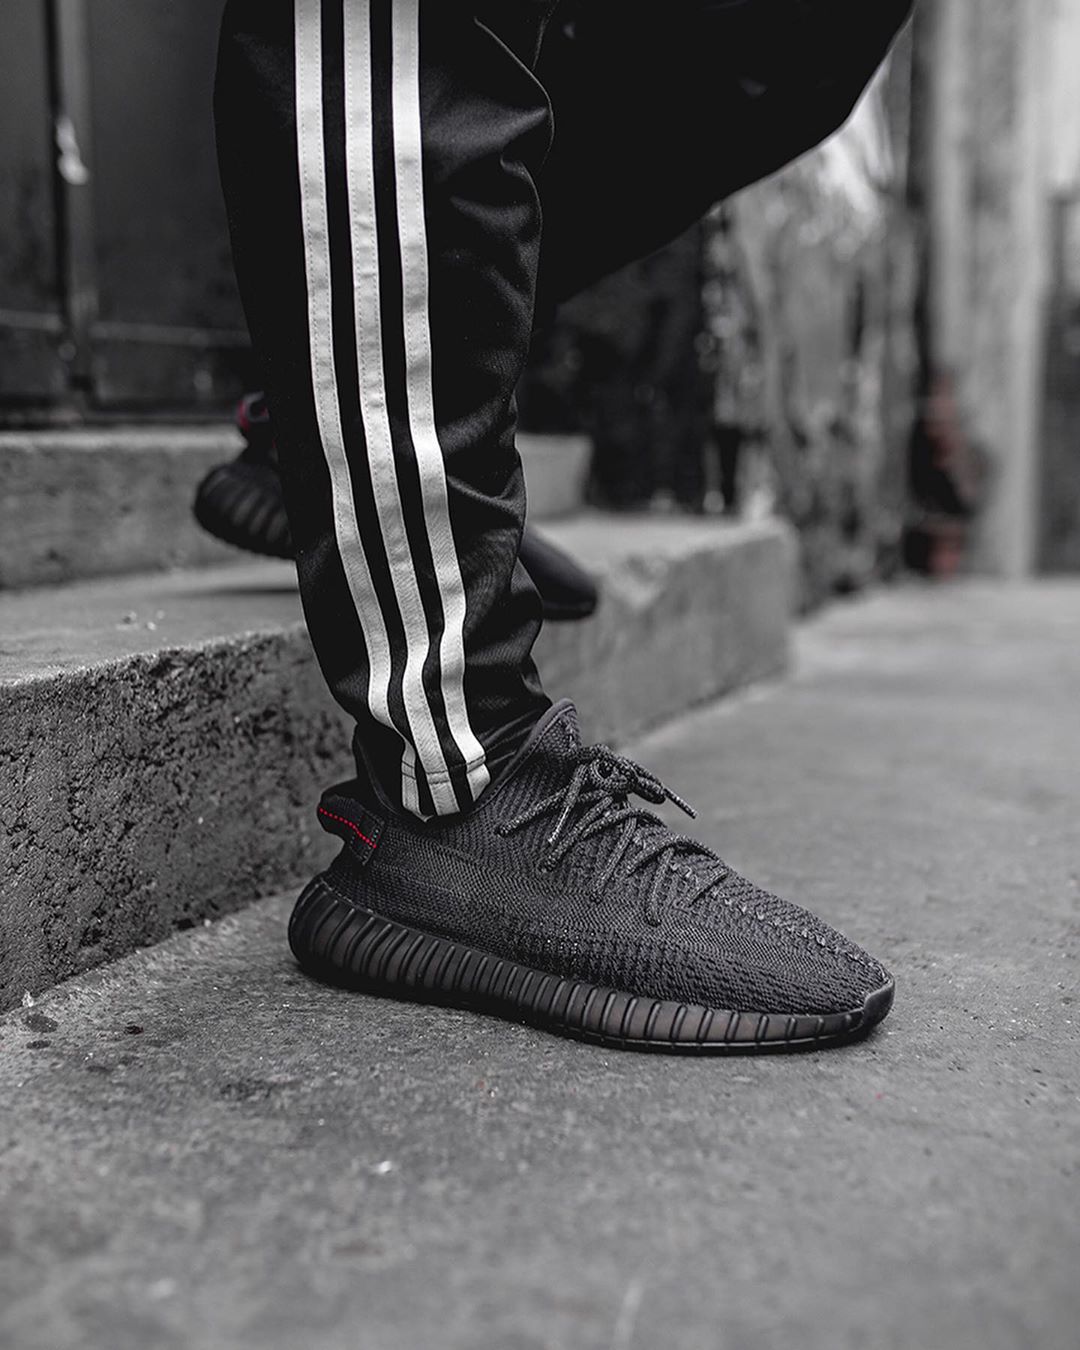 yeezy boost 350 v2 black outfit